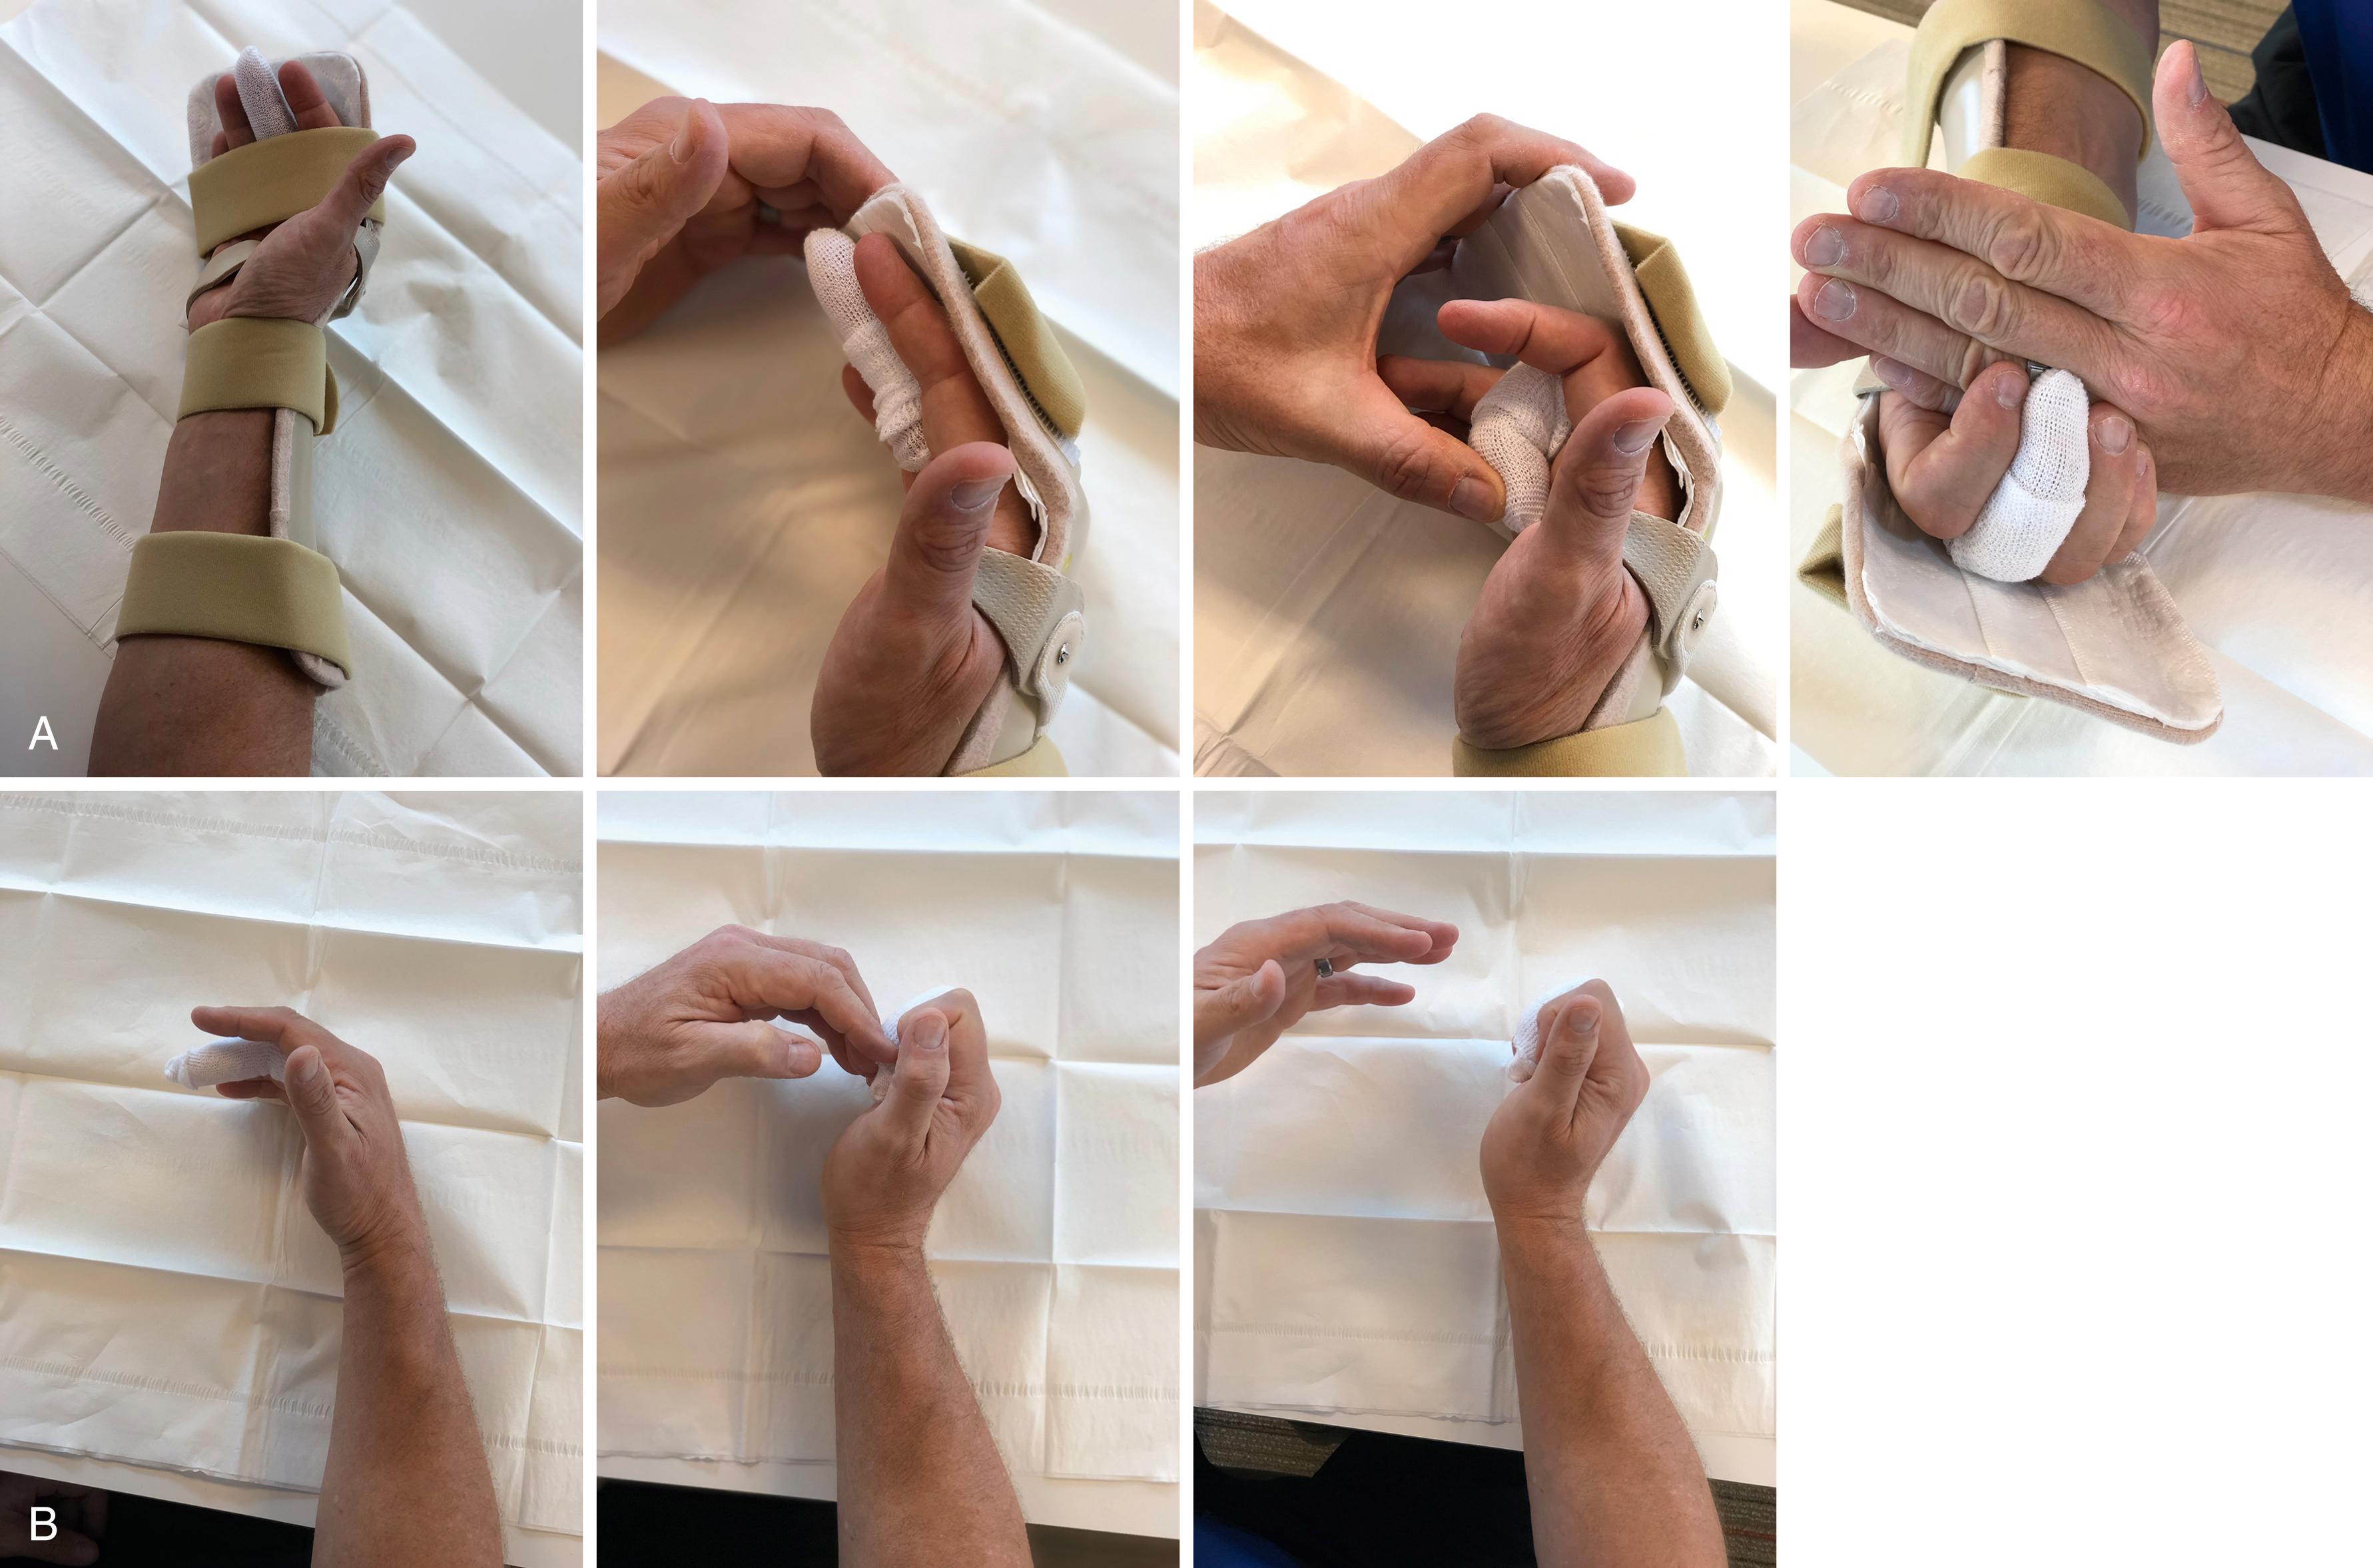 Fig. 6.18, Clinical examples of the author’s program following multistrand multigrasp flexor tendon repair for patients that can participate actively in a rehabilitation program. For these patients, the authors favor use of a static splint for hand protection and a program of early active assistive exercises to improve tendon excursion in the early postoperative period. A, A resting splint with neutral wrist and MCP joints flexed and IP joints comfortably extended allows early active range-of-motion exercises. In this position, early place range-of-motion exercises can be initiated and place-and-hold exercises completed. B, During supervised occupational therapy, the finger is passively flexed with the wrist in neutral. Wrist is extended while maintaining passive digital flexion. The patient holds this position with light active flexion to generate tendon excursion.